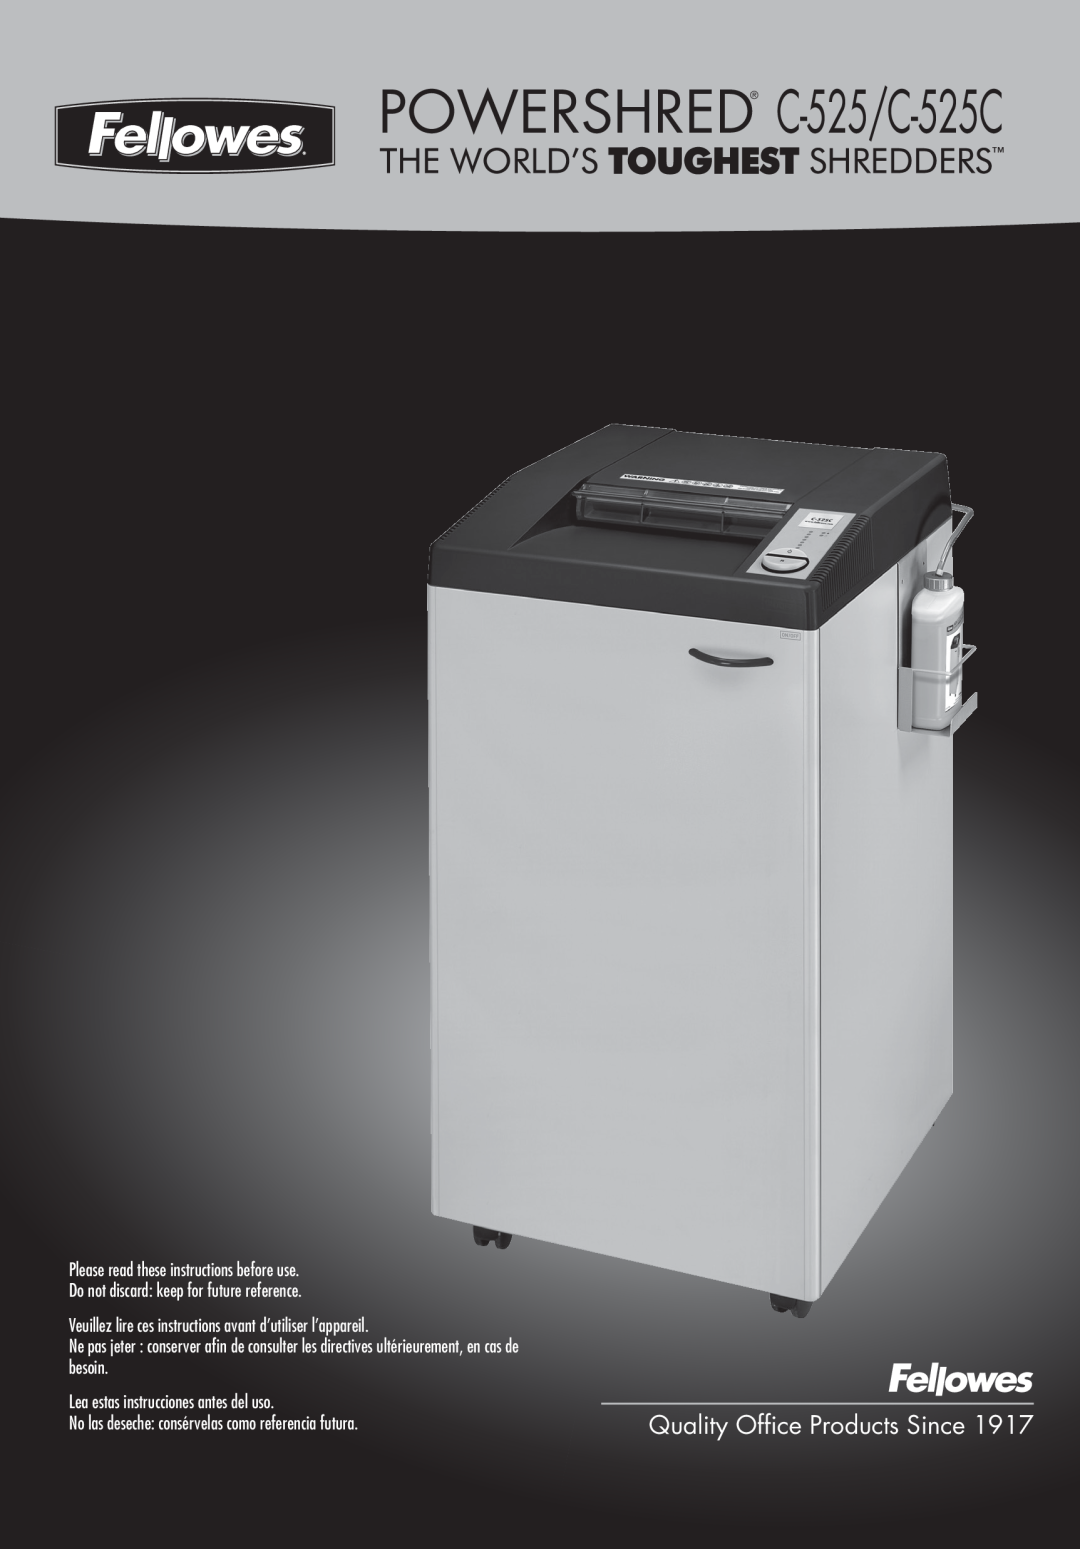 Fellowes manual POWERSHRED C-525/C-525C, Quality Office Products Since 